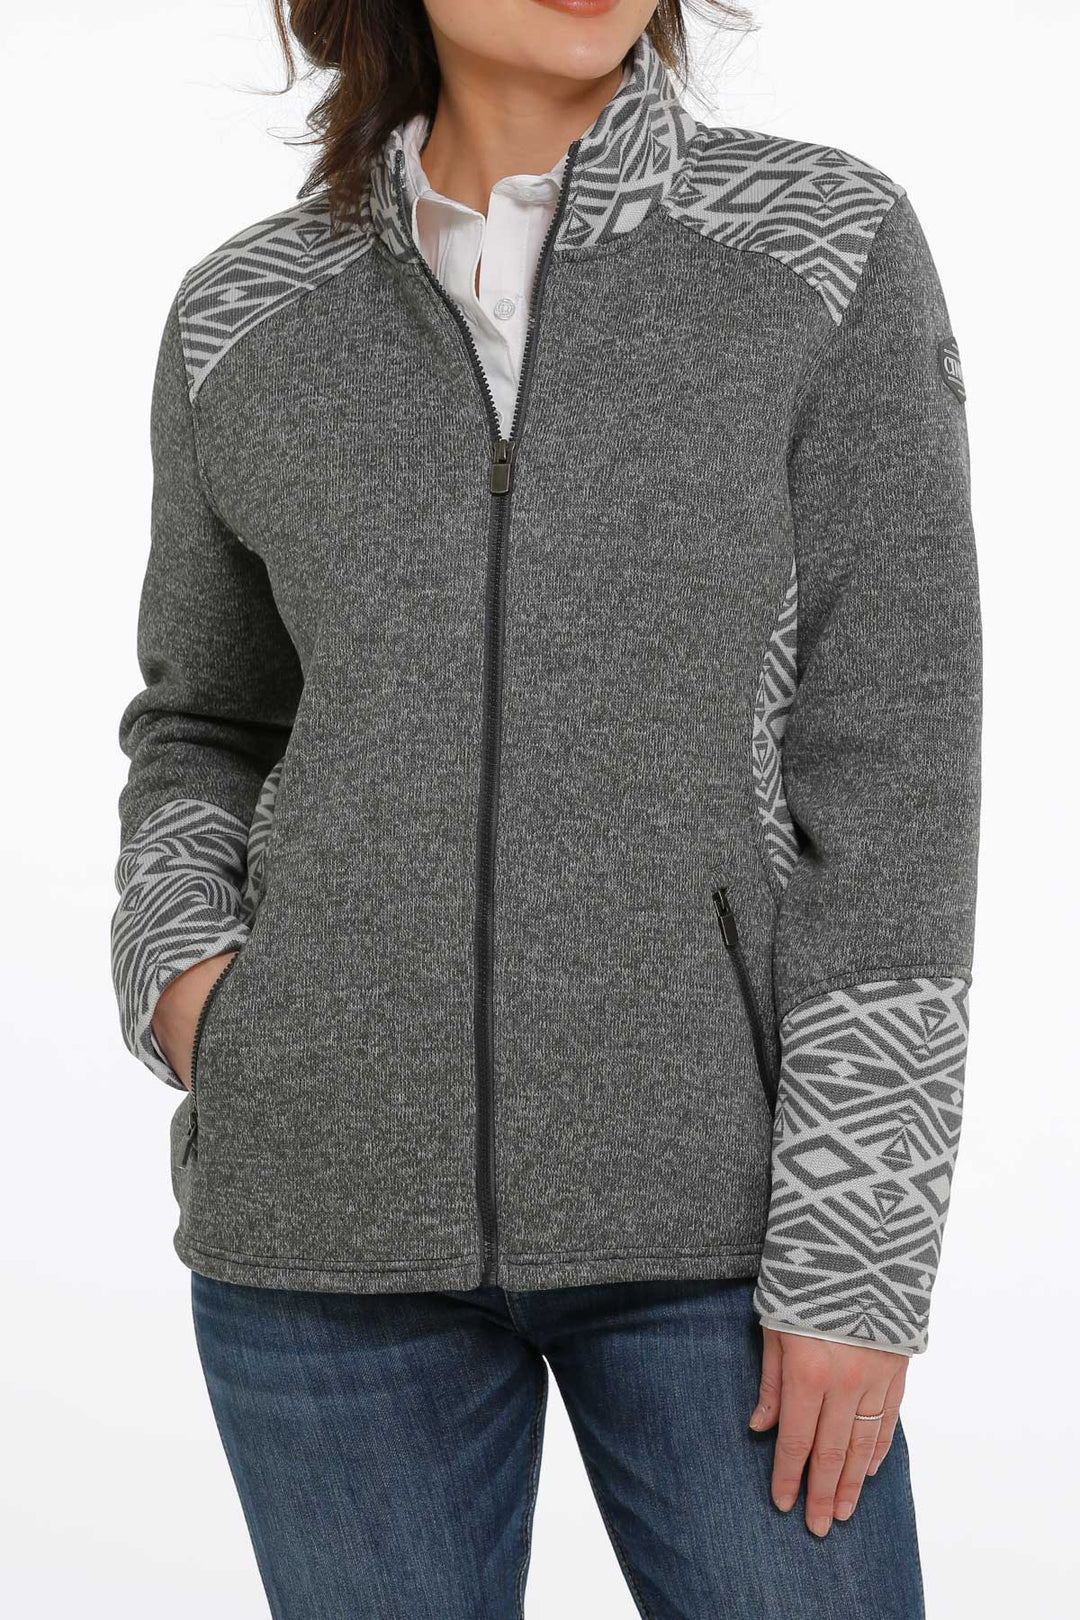 Cinch | Ladies Charcoal Color Blocked Sweater Jacket